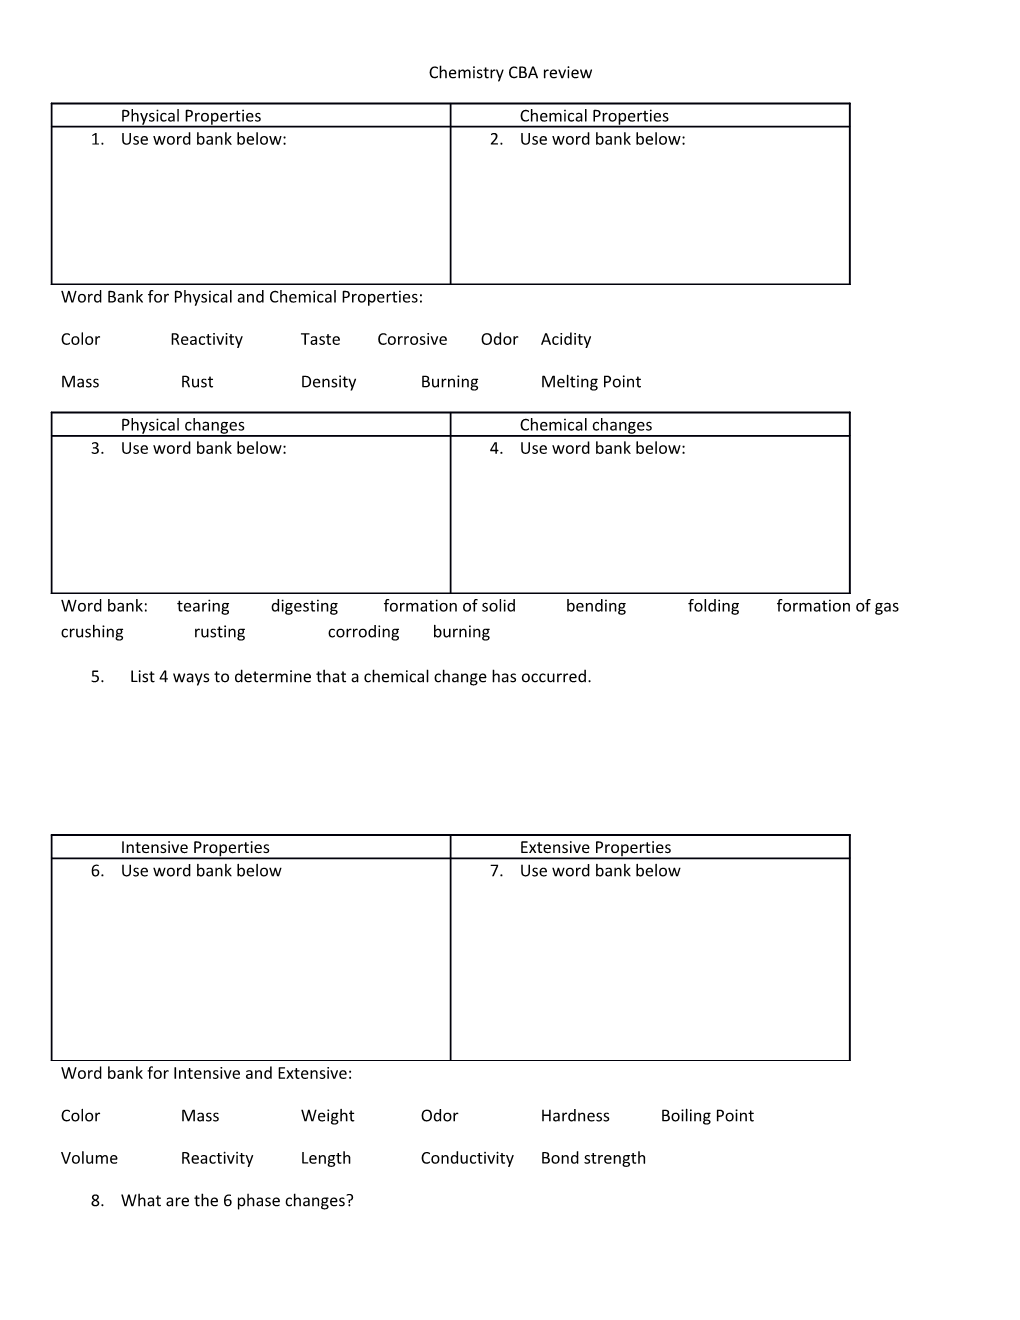 Word Bank for Physical and Chemical Properties